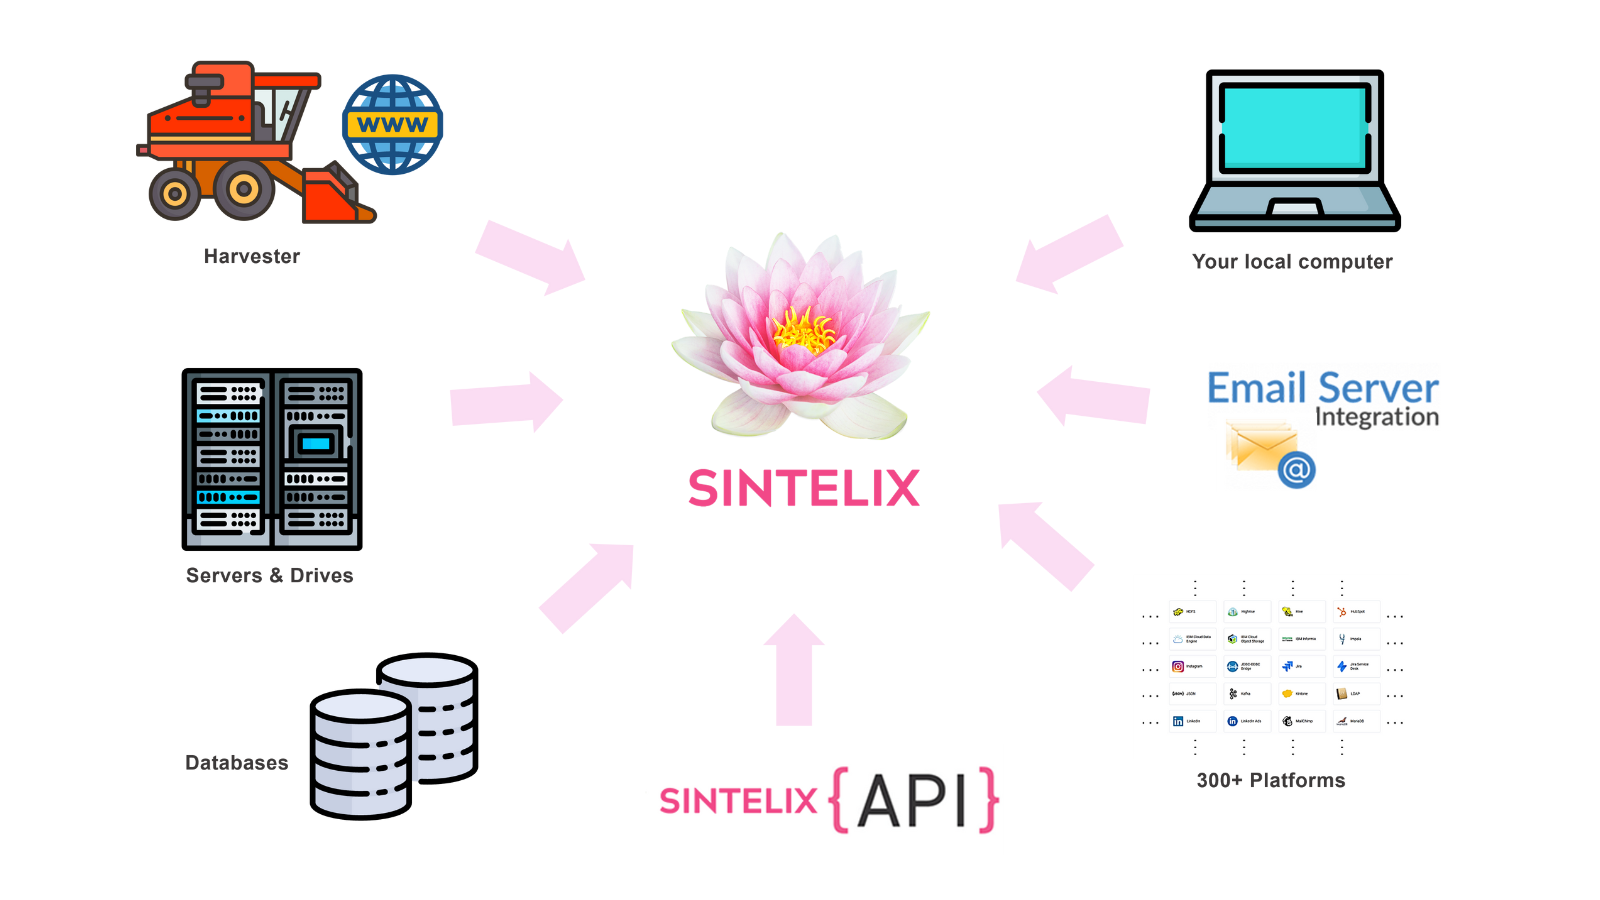 Load data into Sintelix from multiple sources